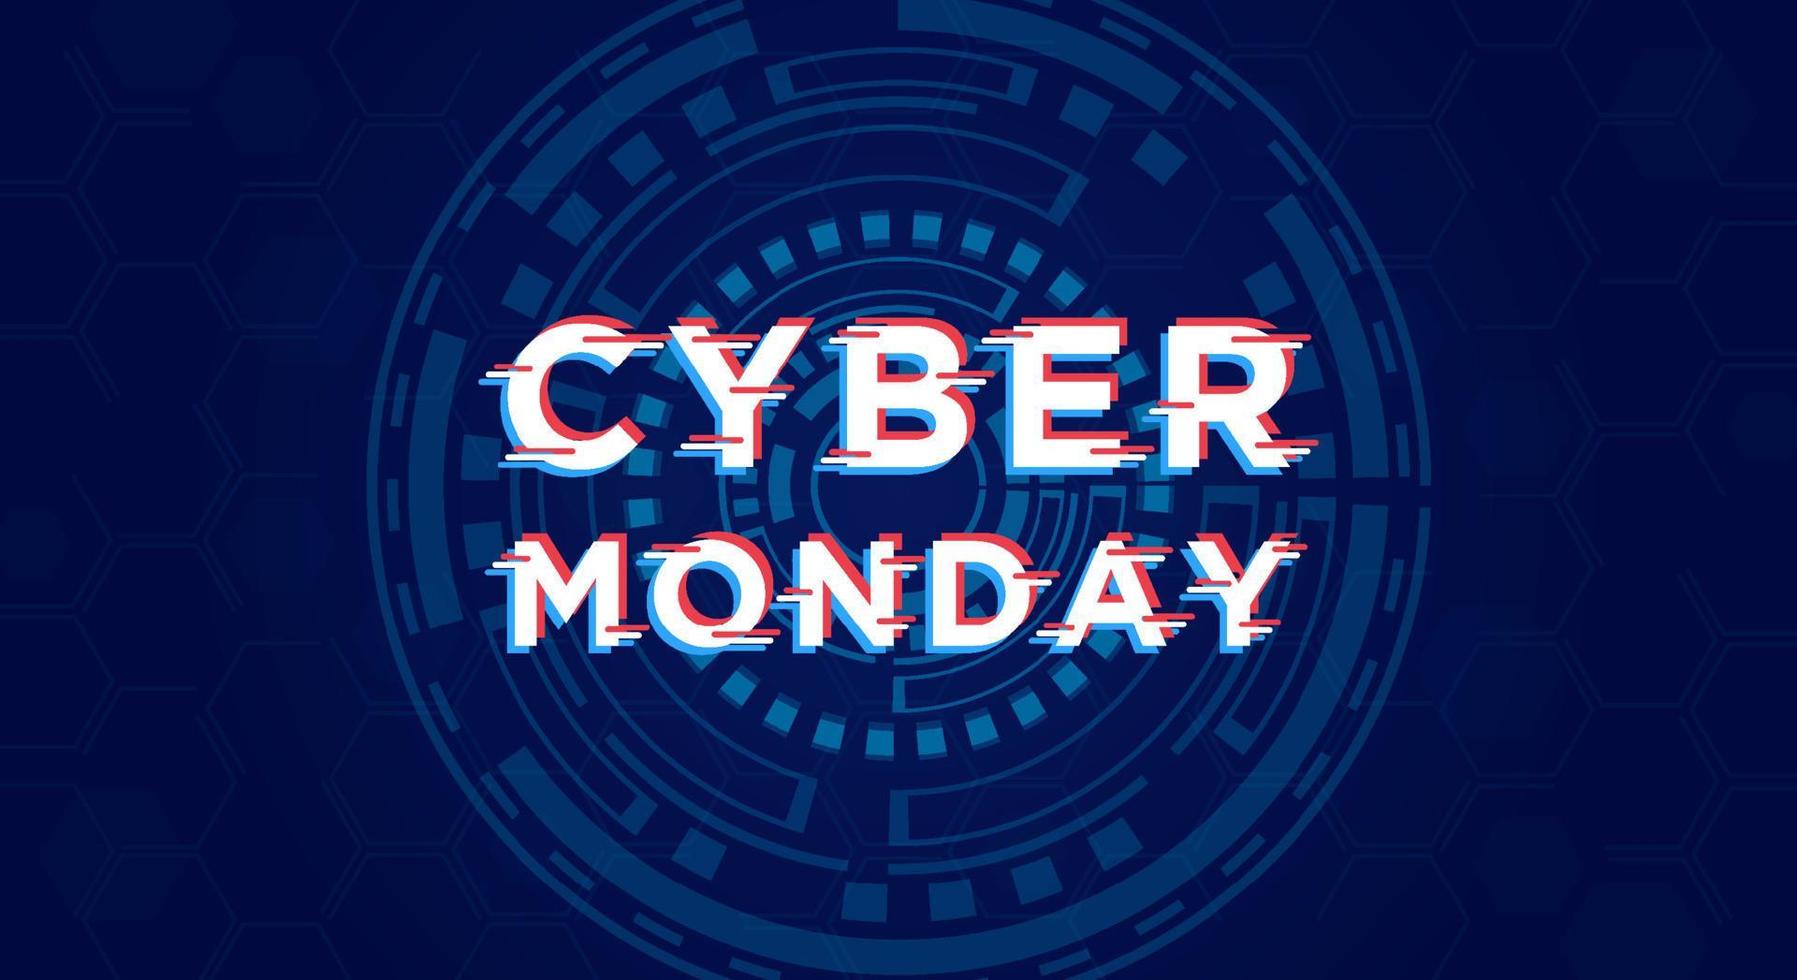 Cyber monday promo banner with lines on glitch screen. . Advertising poster or banner design with abstract elements on blue background. vector